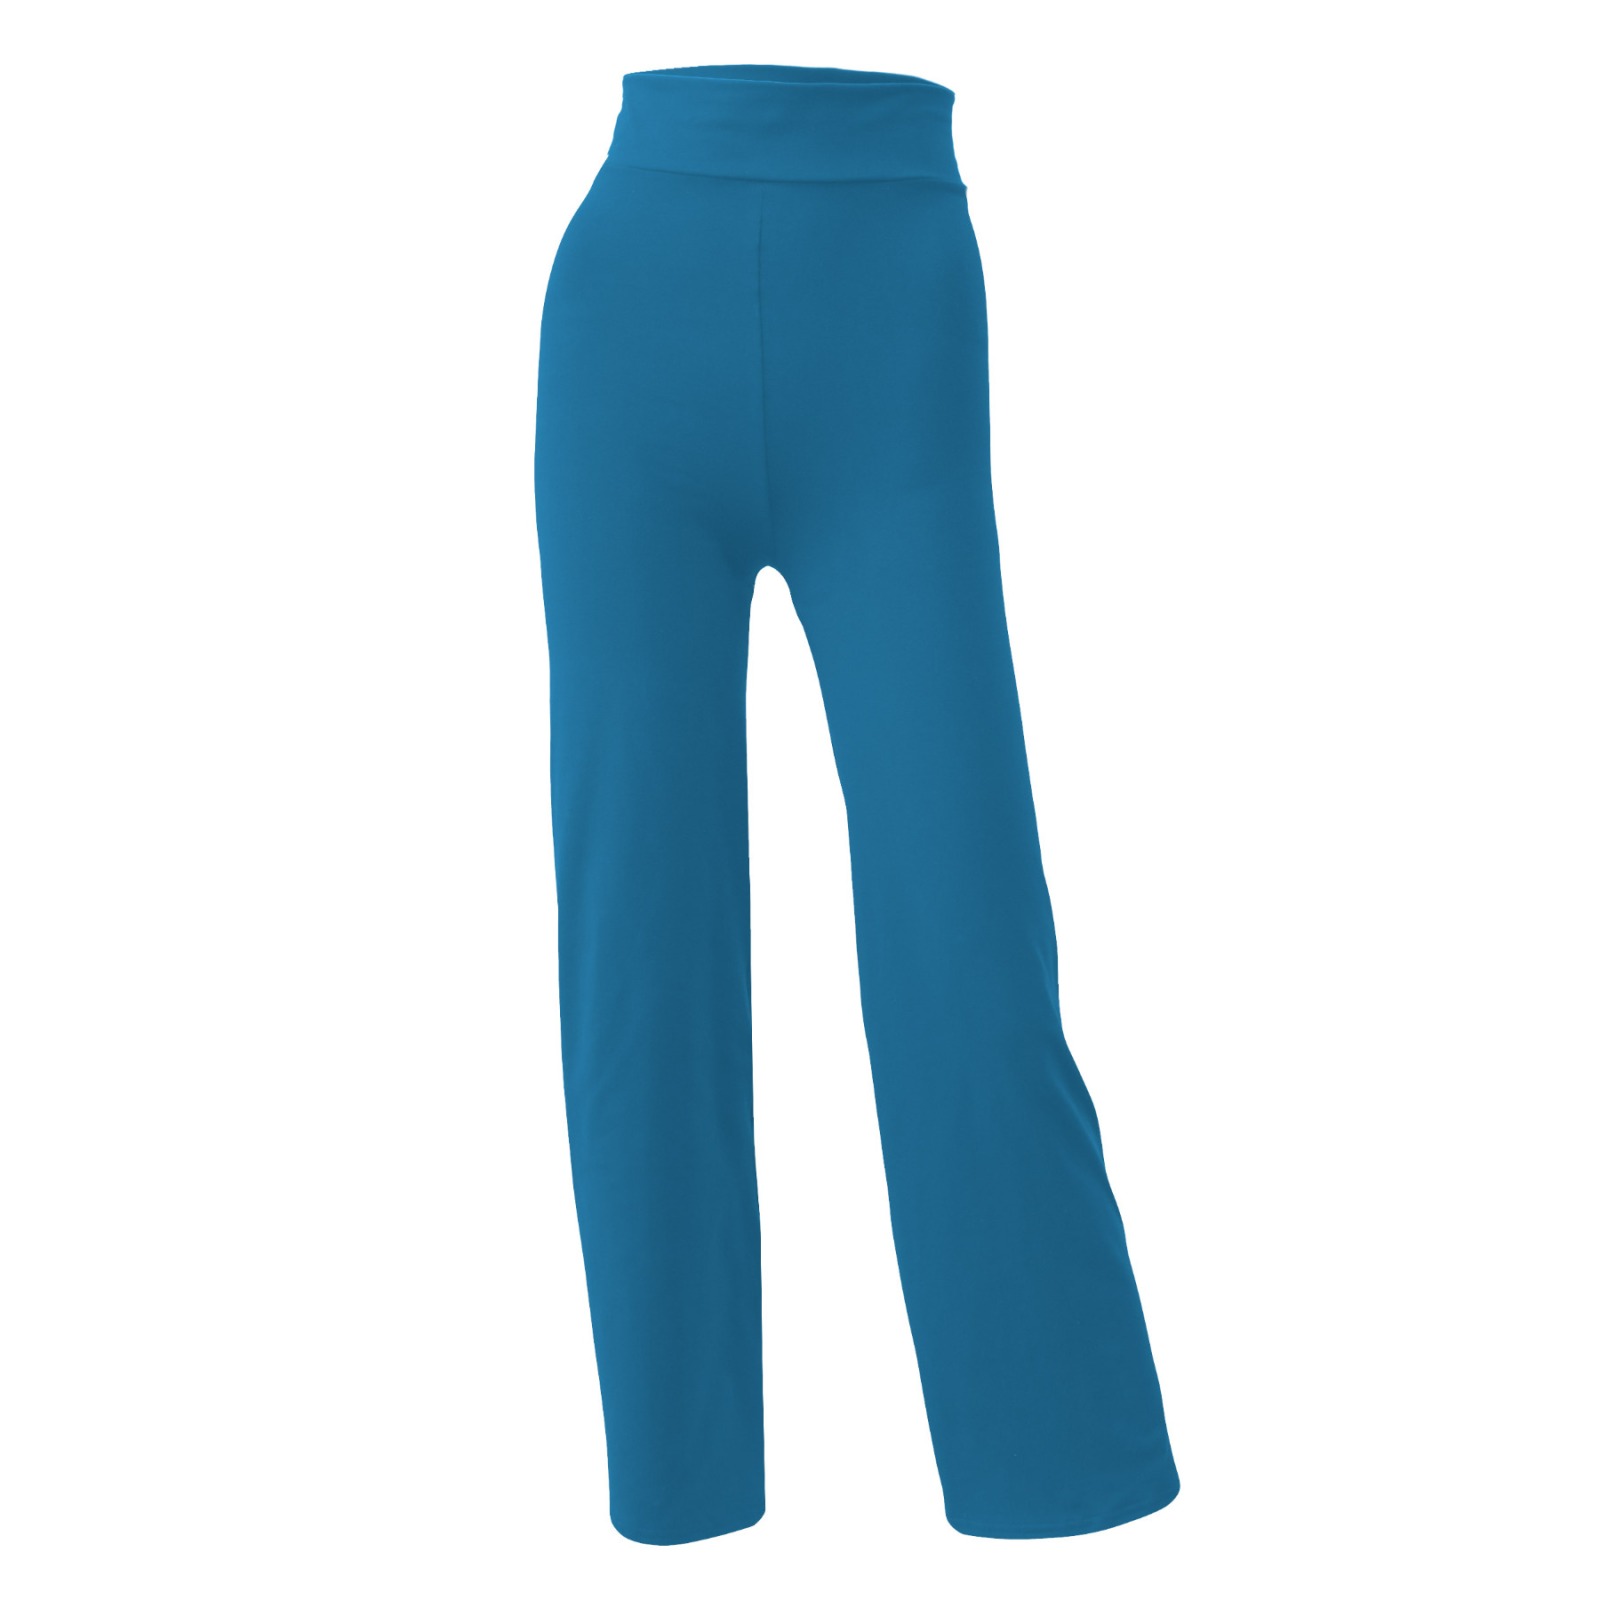 Yoga pants Relaxed Fit bluebottle blue